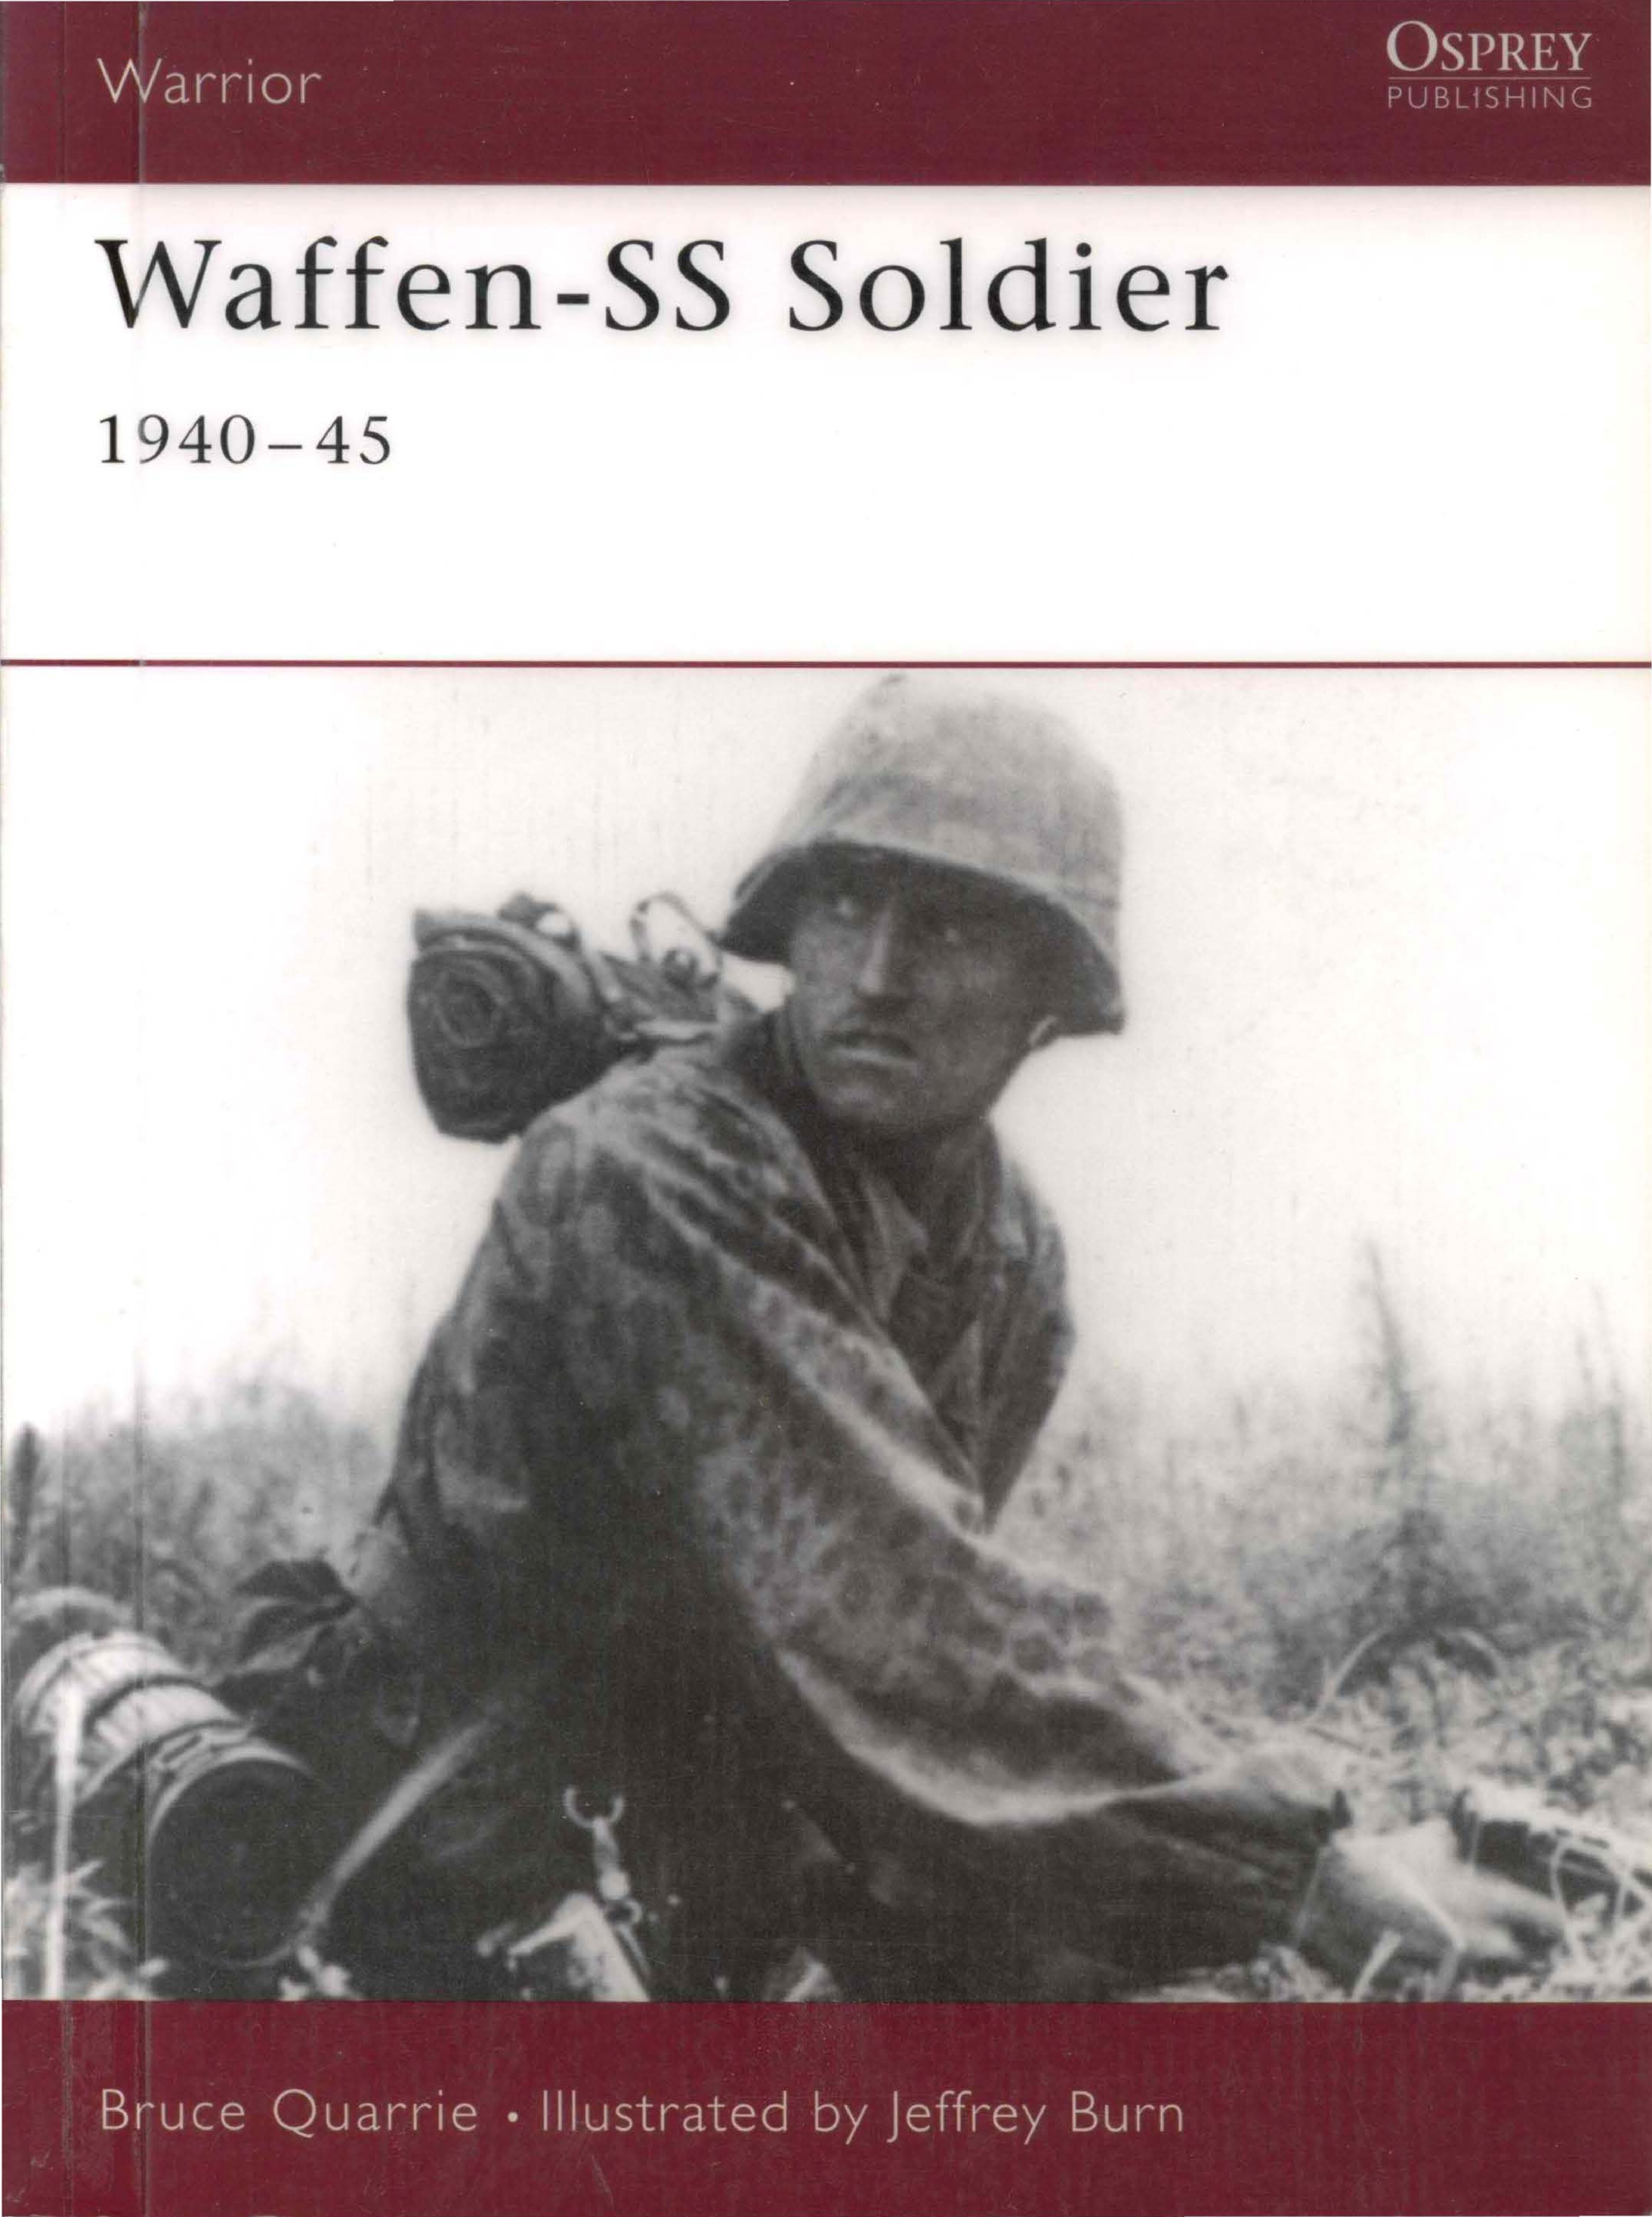 Quarrie, Bruce; Waffen-SS Soldier